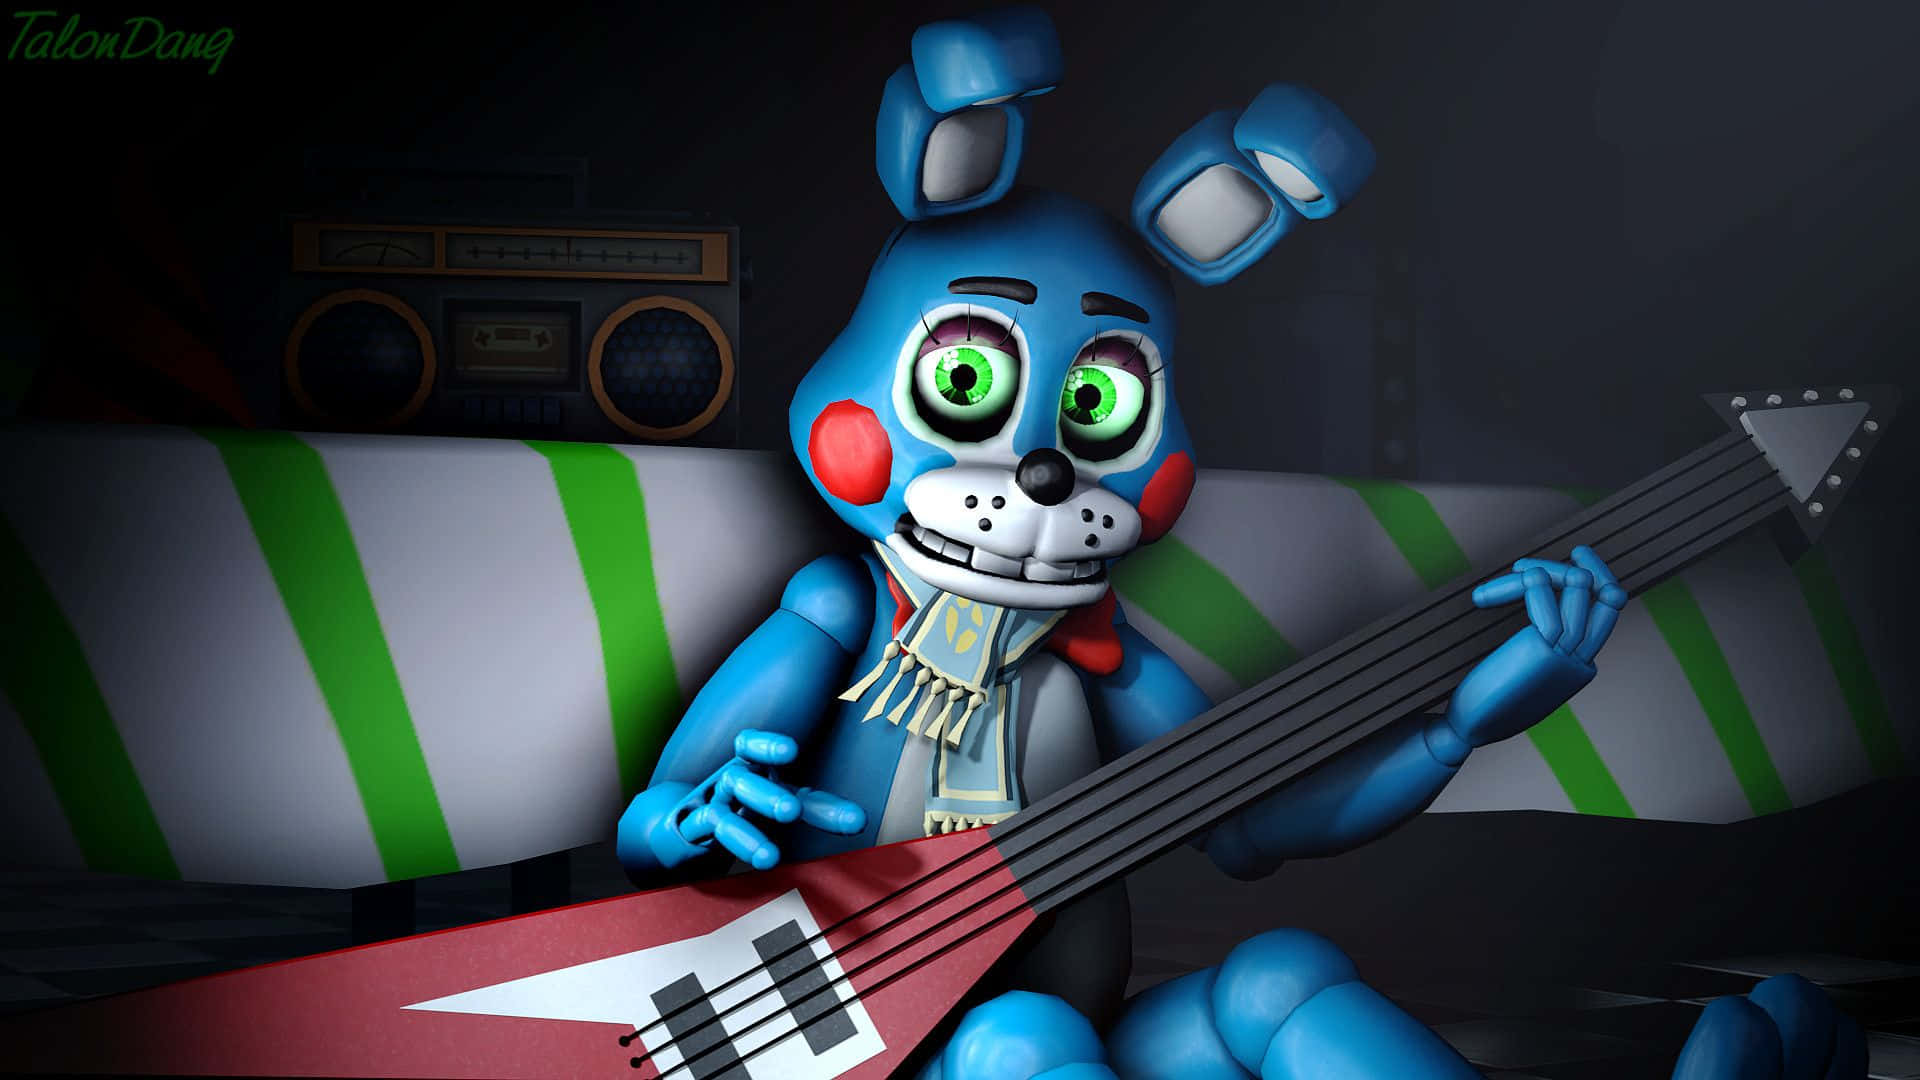 Toy Bonnie Holding Guitar Wallpaper